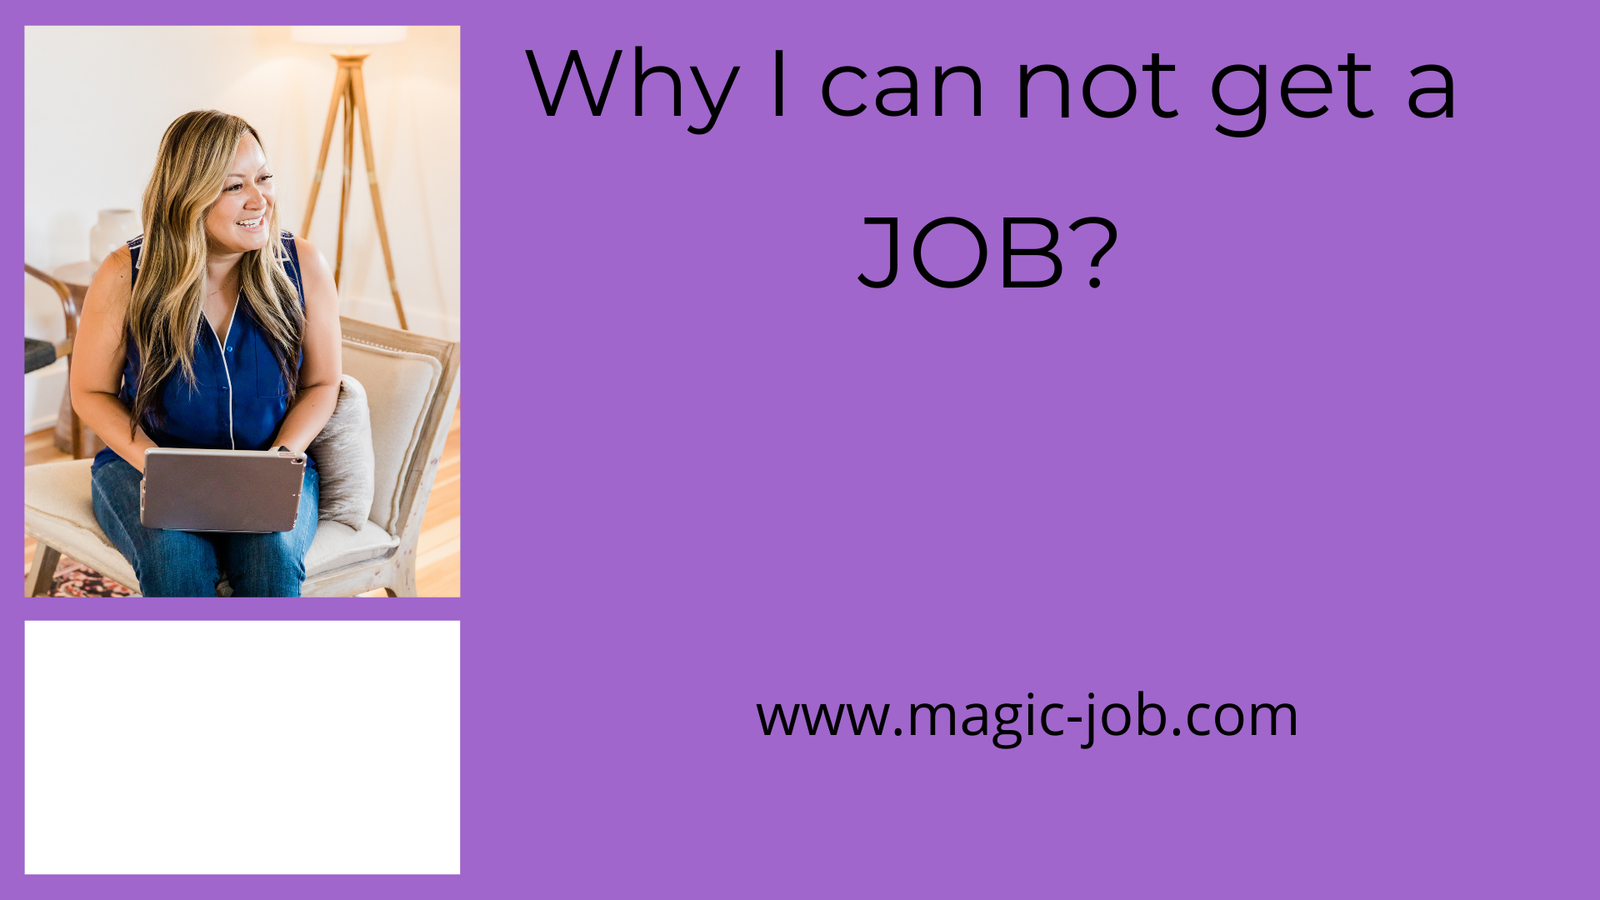 Why I can not Get a Job? image